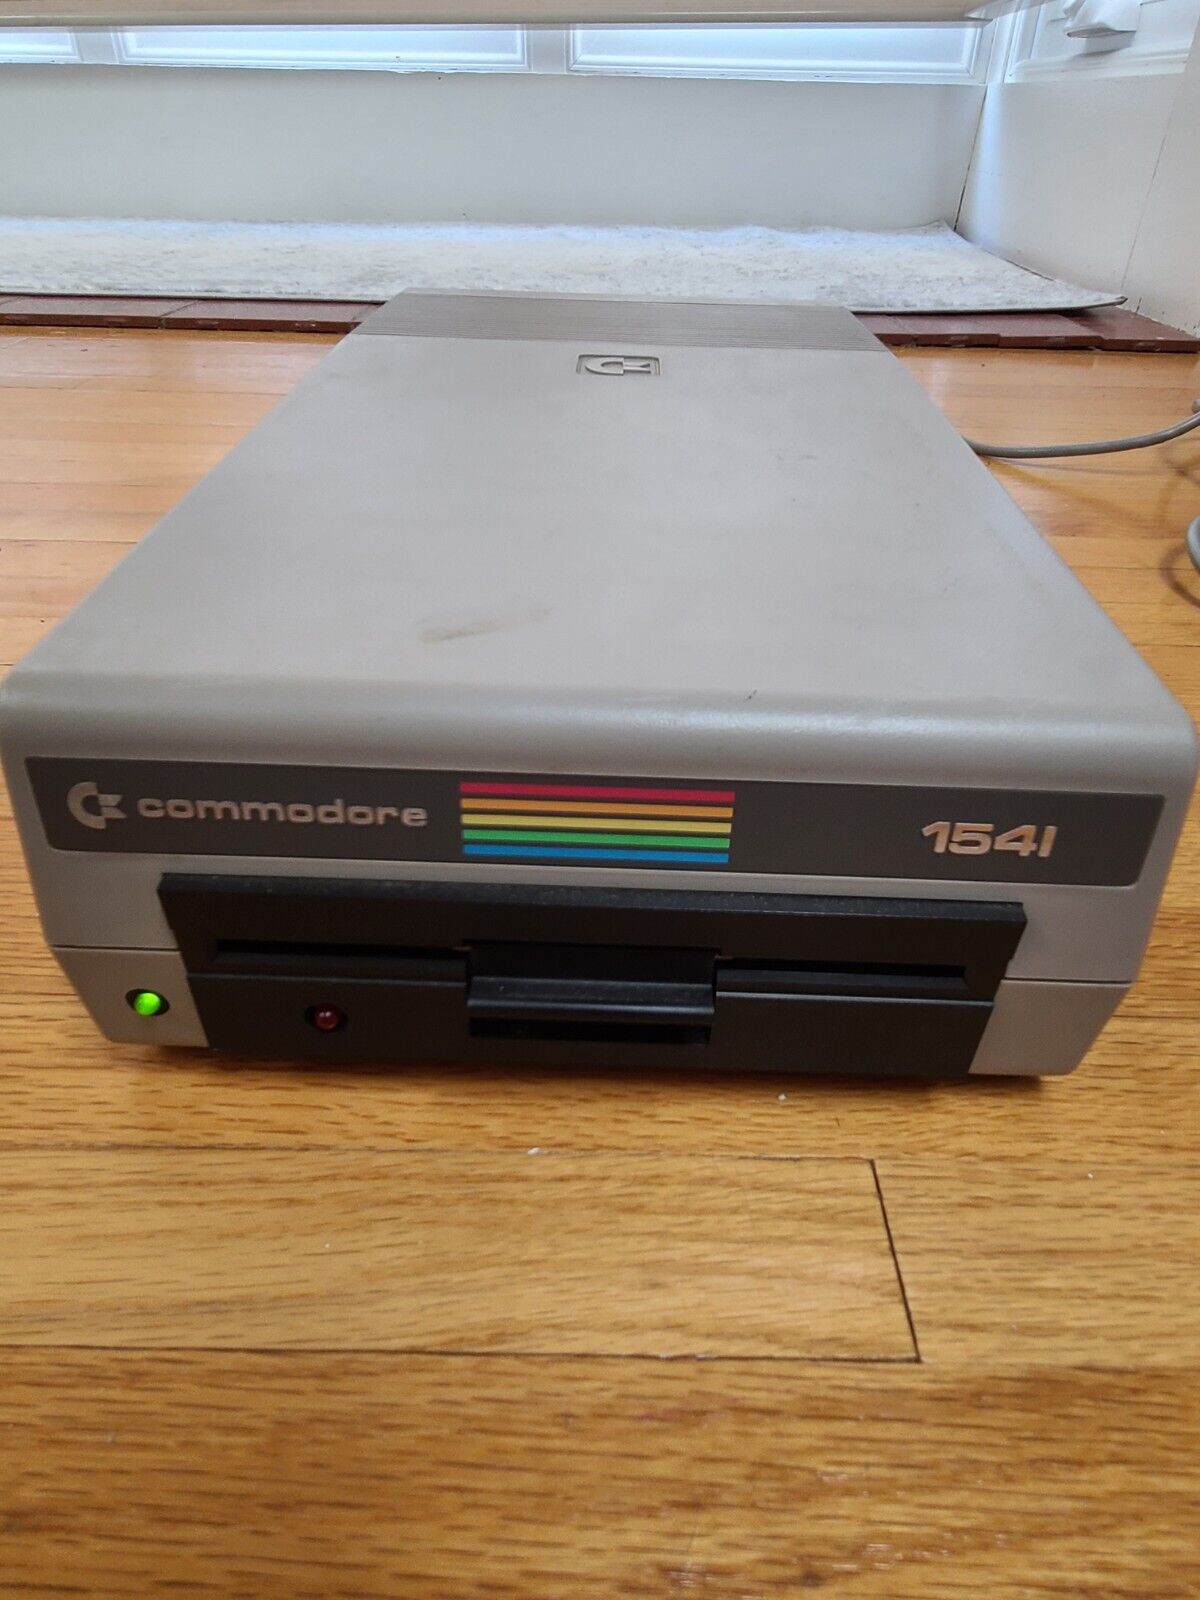 Commodore 64 1541 Floppy Disk Drive with cords